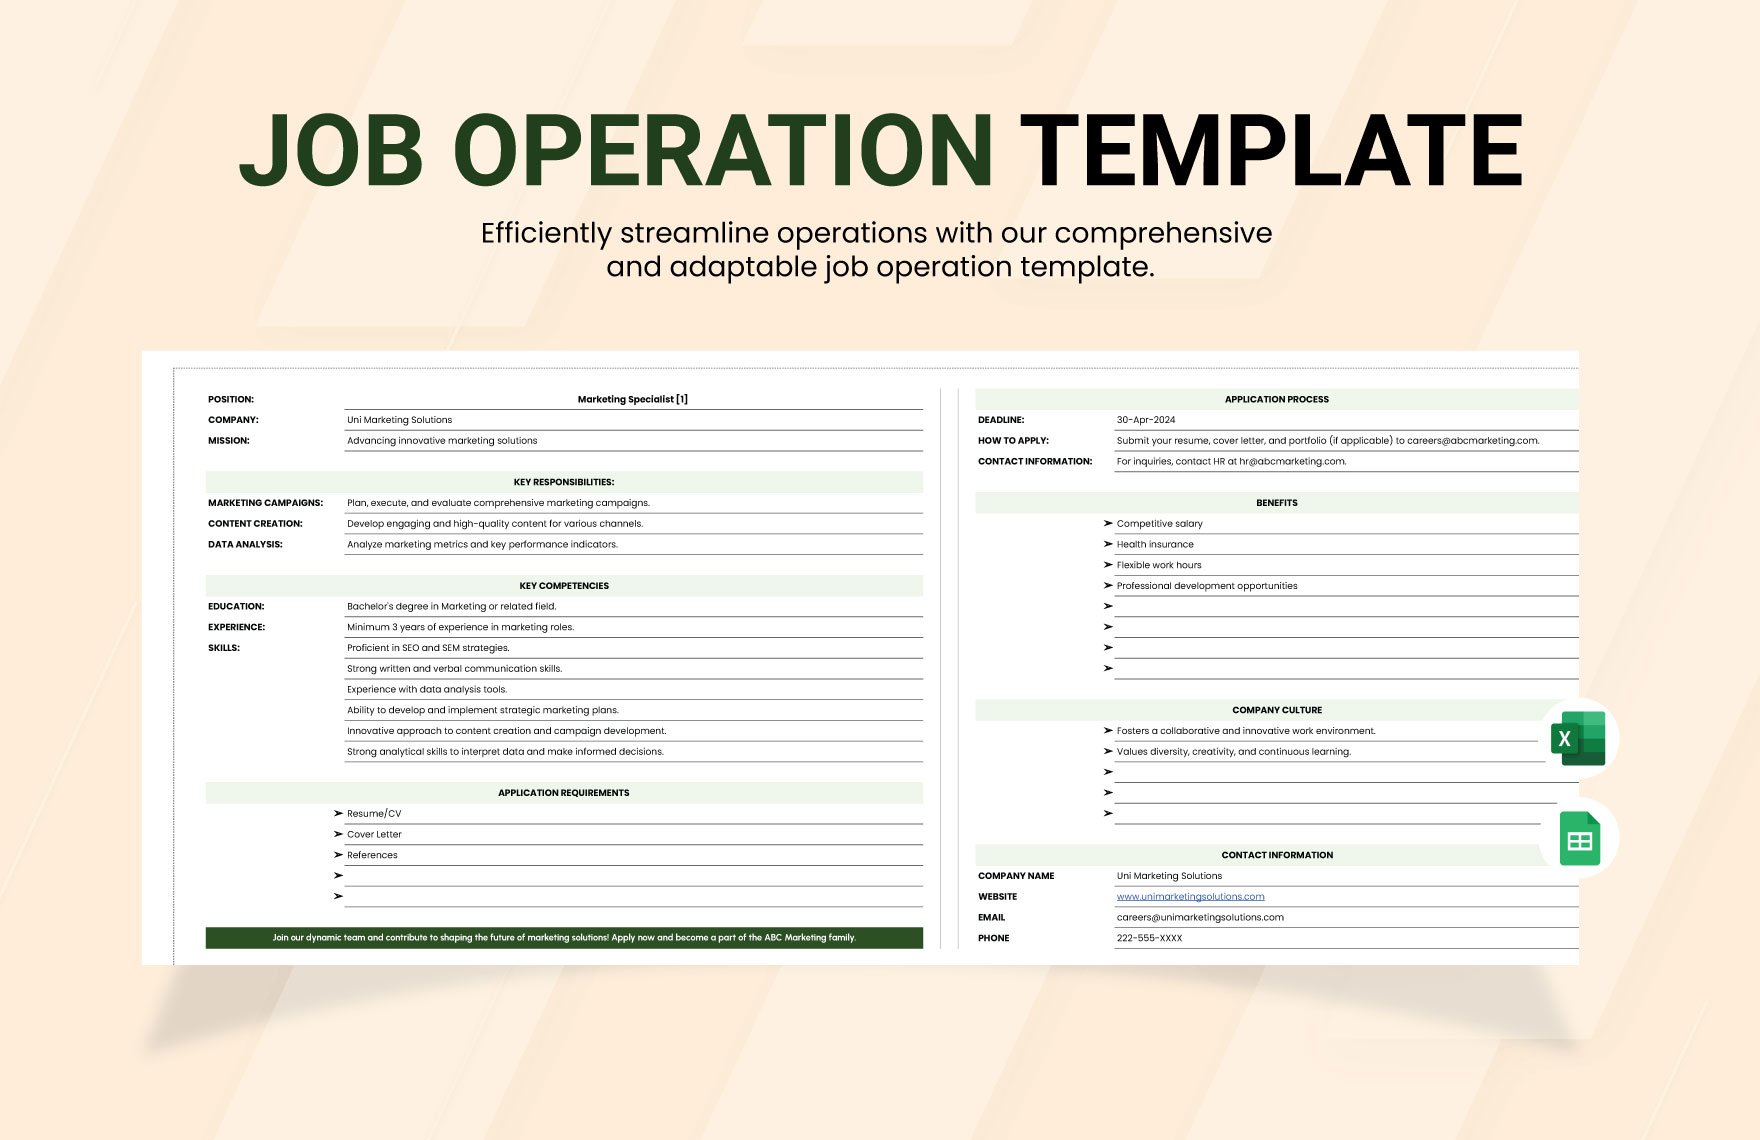 Job Operation Template in Excel, Google Sheets